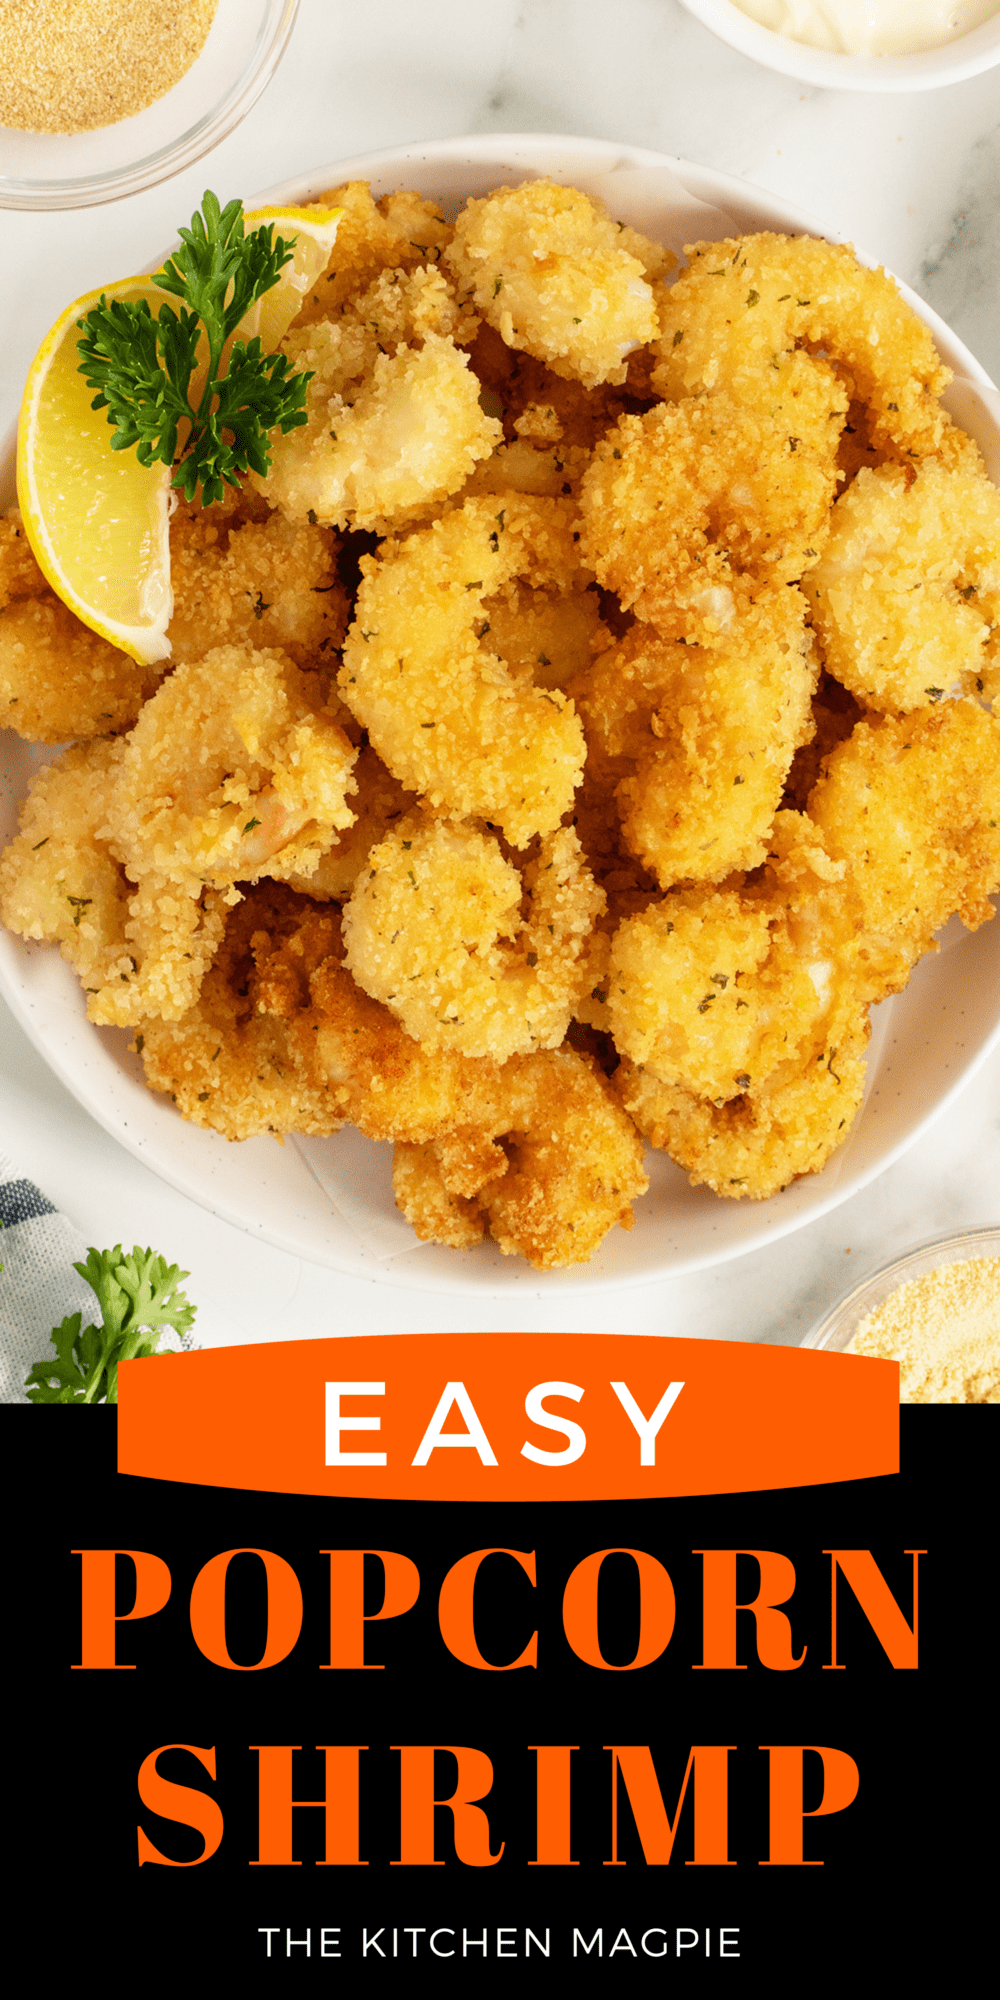 Popcorn Shrimp can be delicious when homemade and served as an appetizer, either for your family or as the perfect party snack!